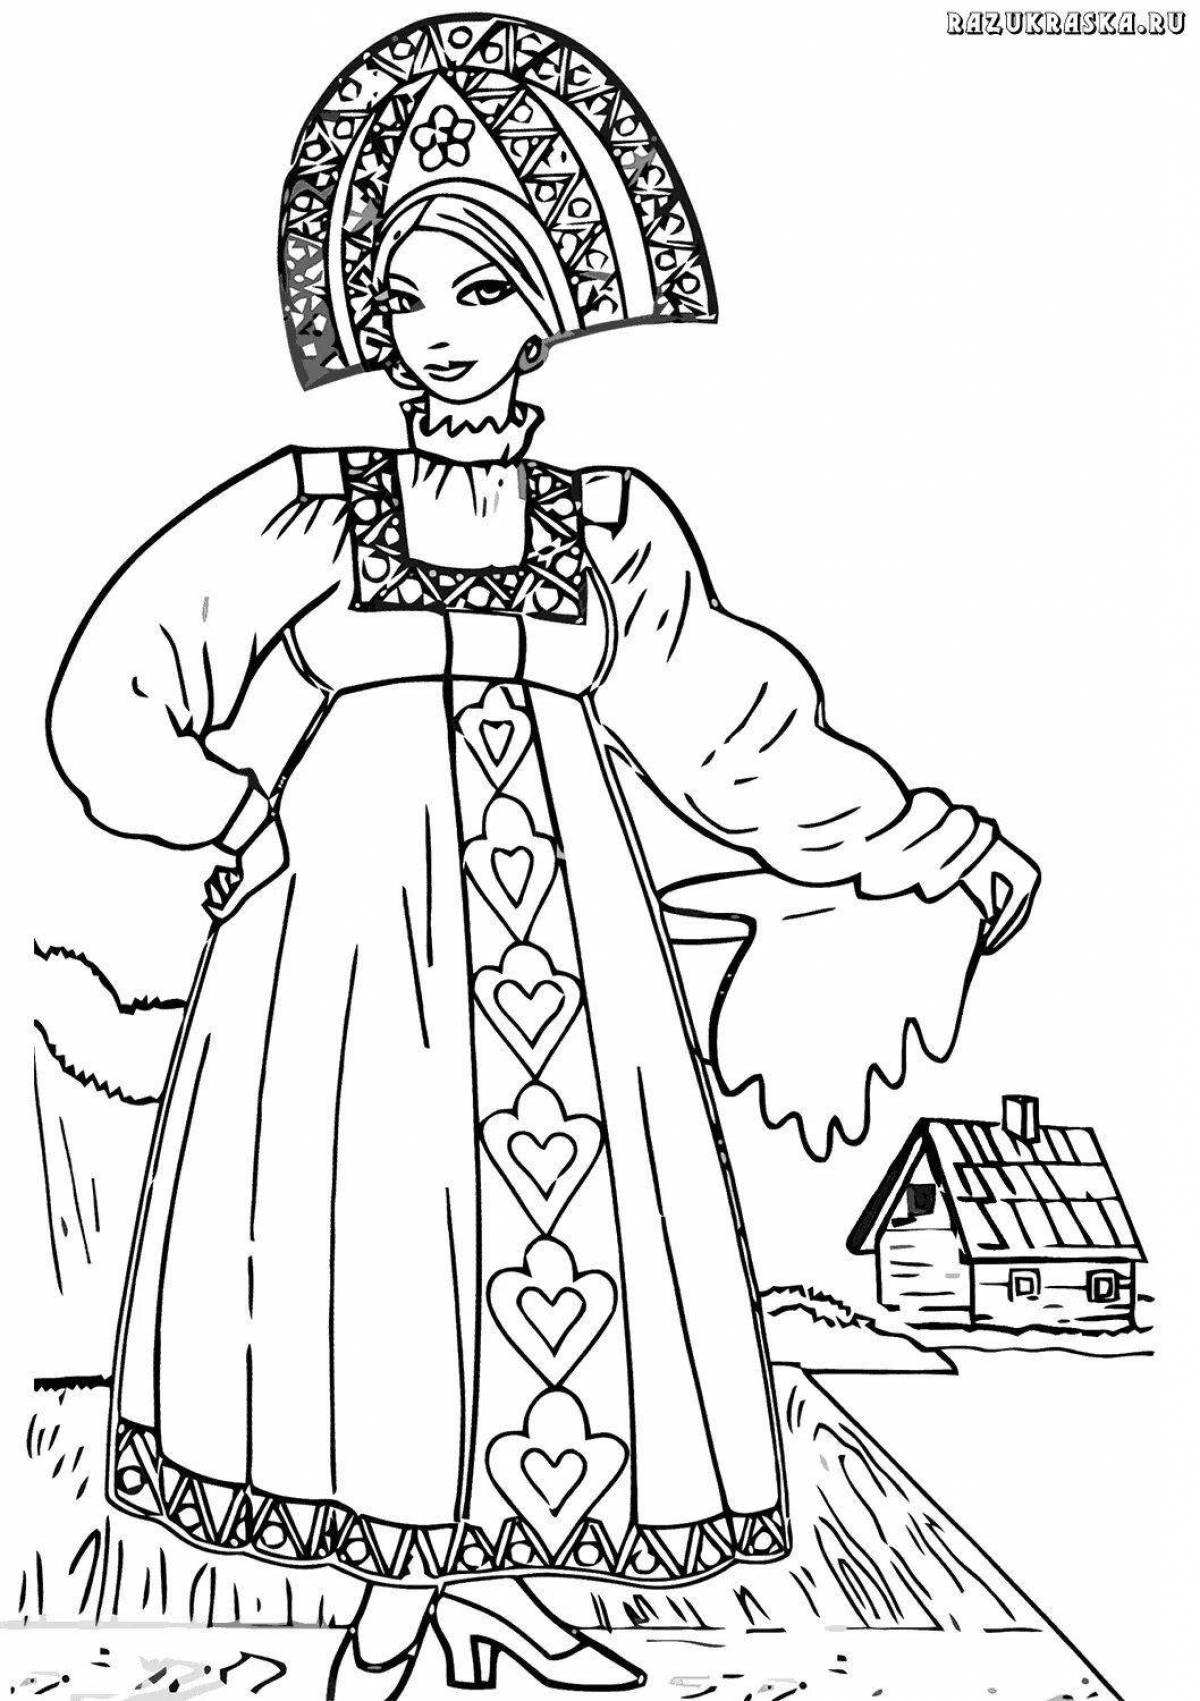 Coloring page dazzling Russian folk costume